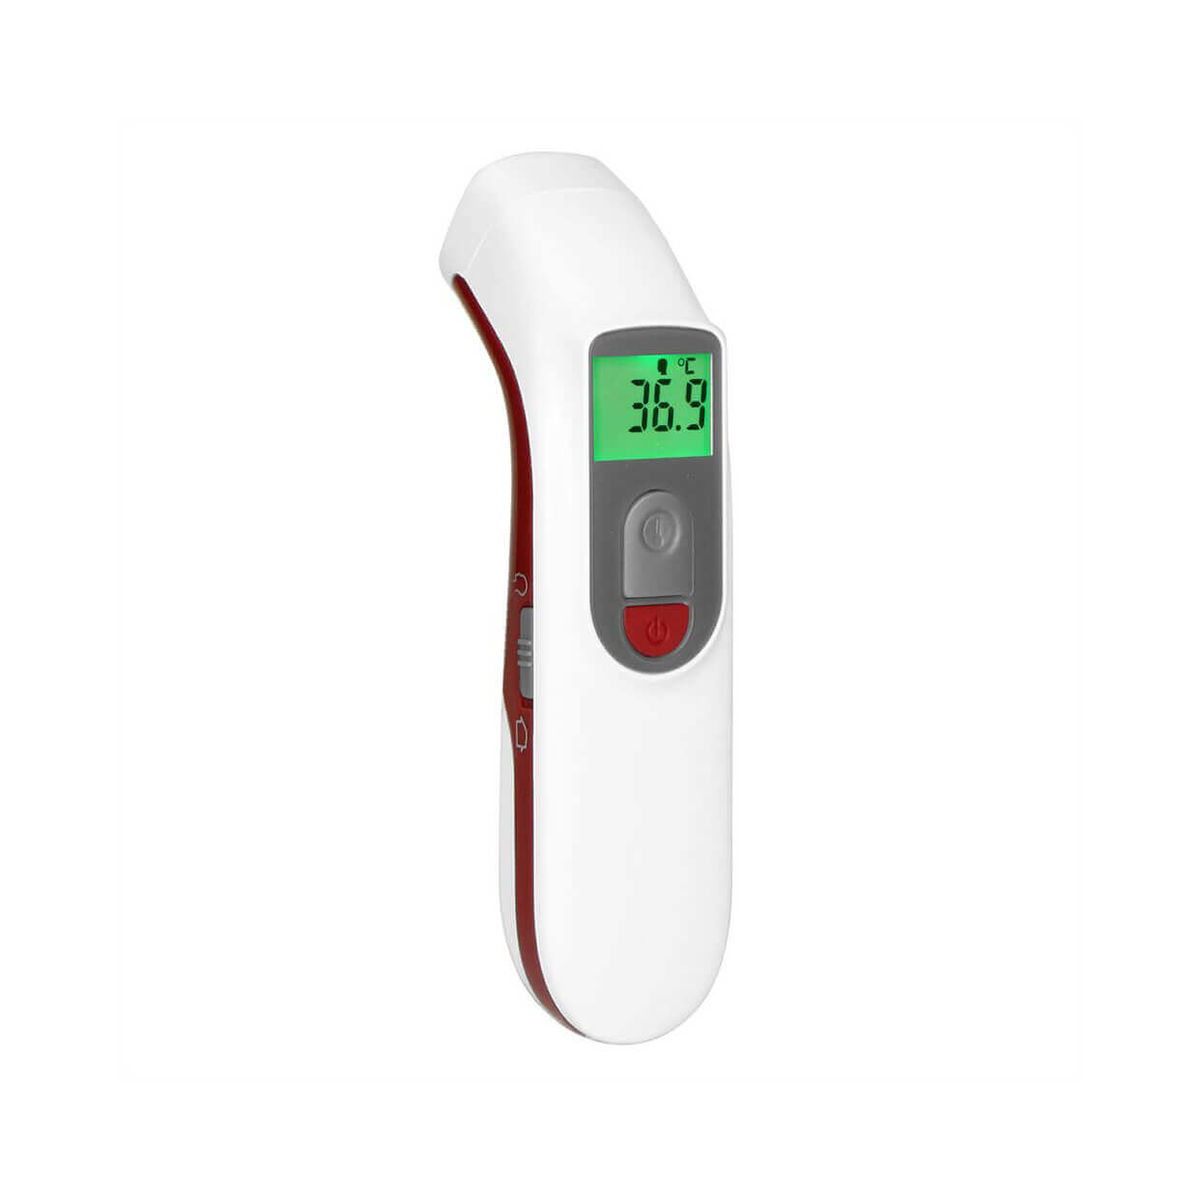 Image of ALECTO BC-38 Infrarot-Fieberthermometer weiss bei nettoshop.ch